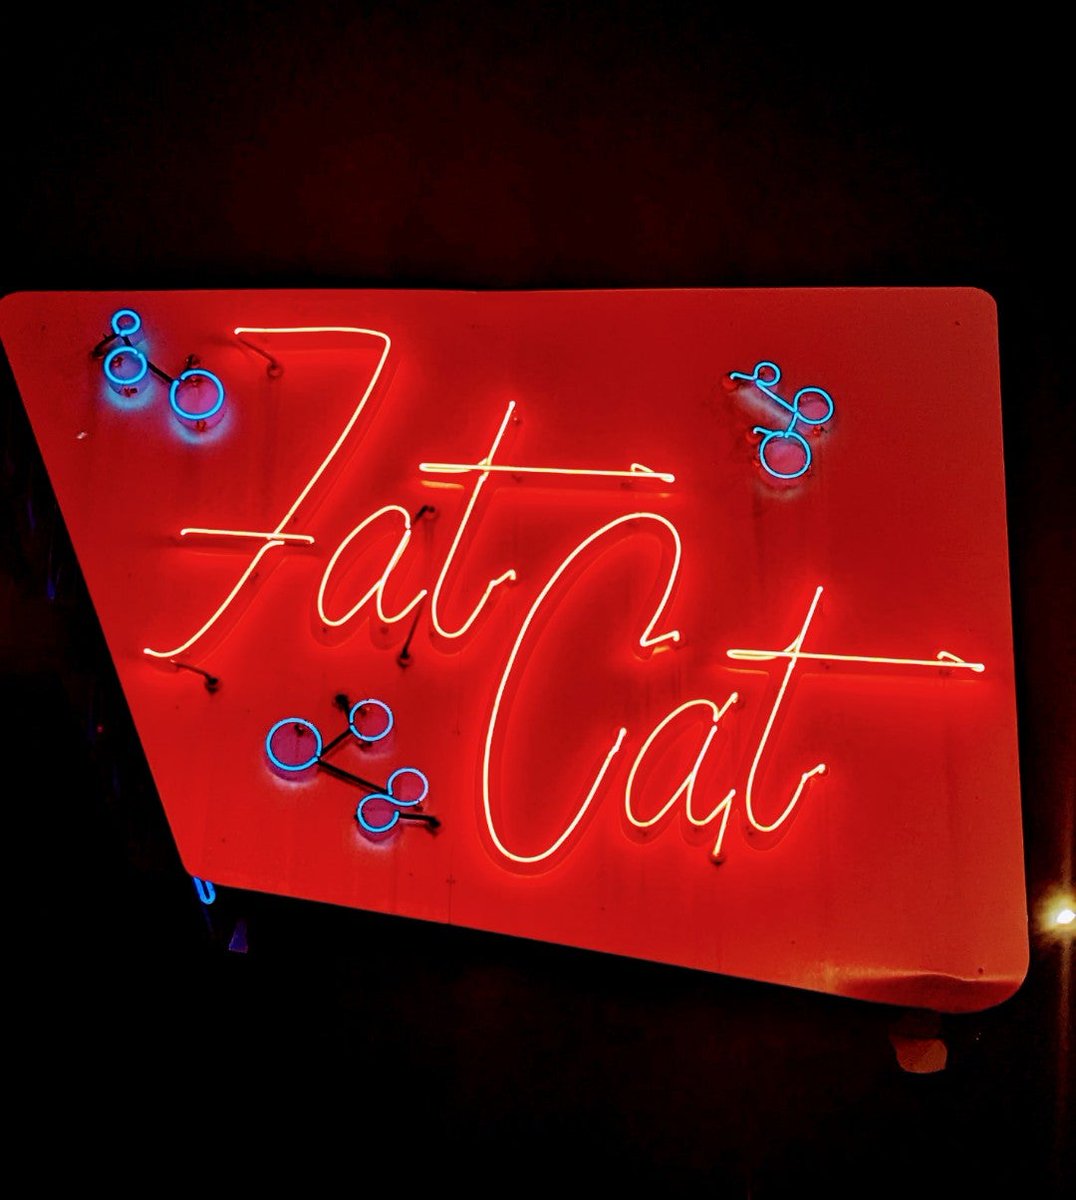 Fun, casual #Uptown neighborhood eatery. Loved the BYOBurger special tonight! (@ Fat Cat Bar & Grill - @fatcatchicago in Chicago, IL) swarmapp.com/c/1Ch6IzkQbMb